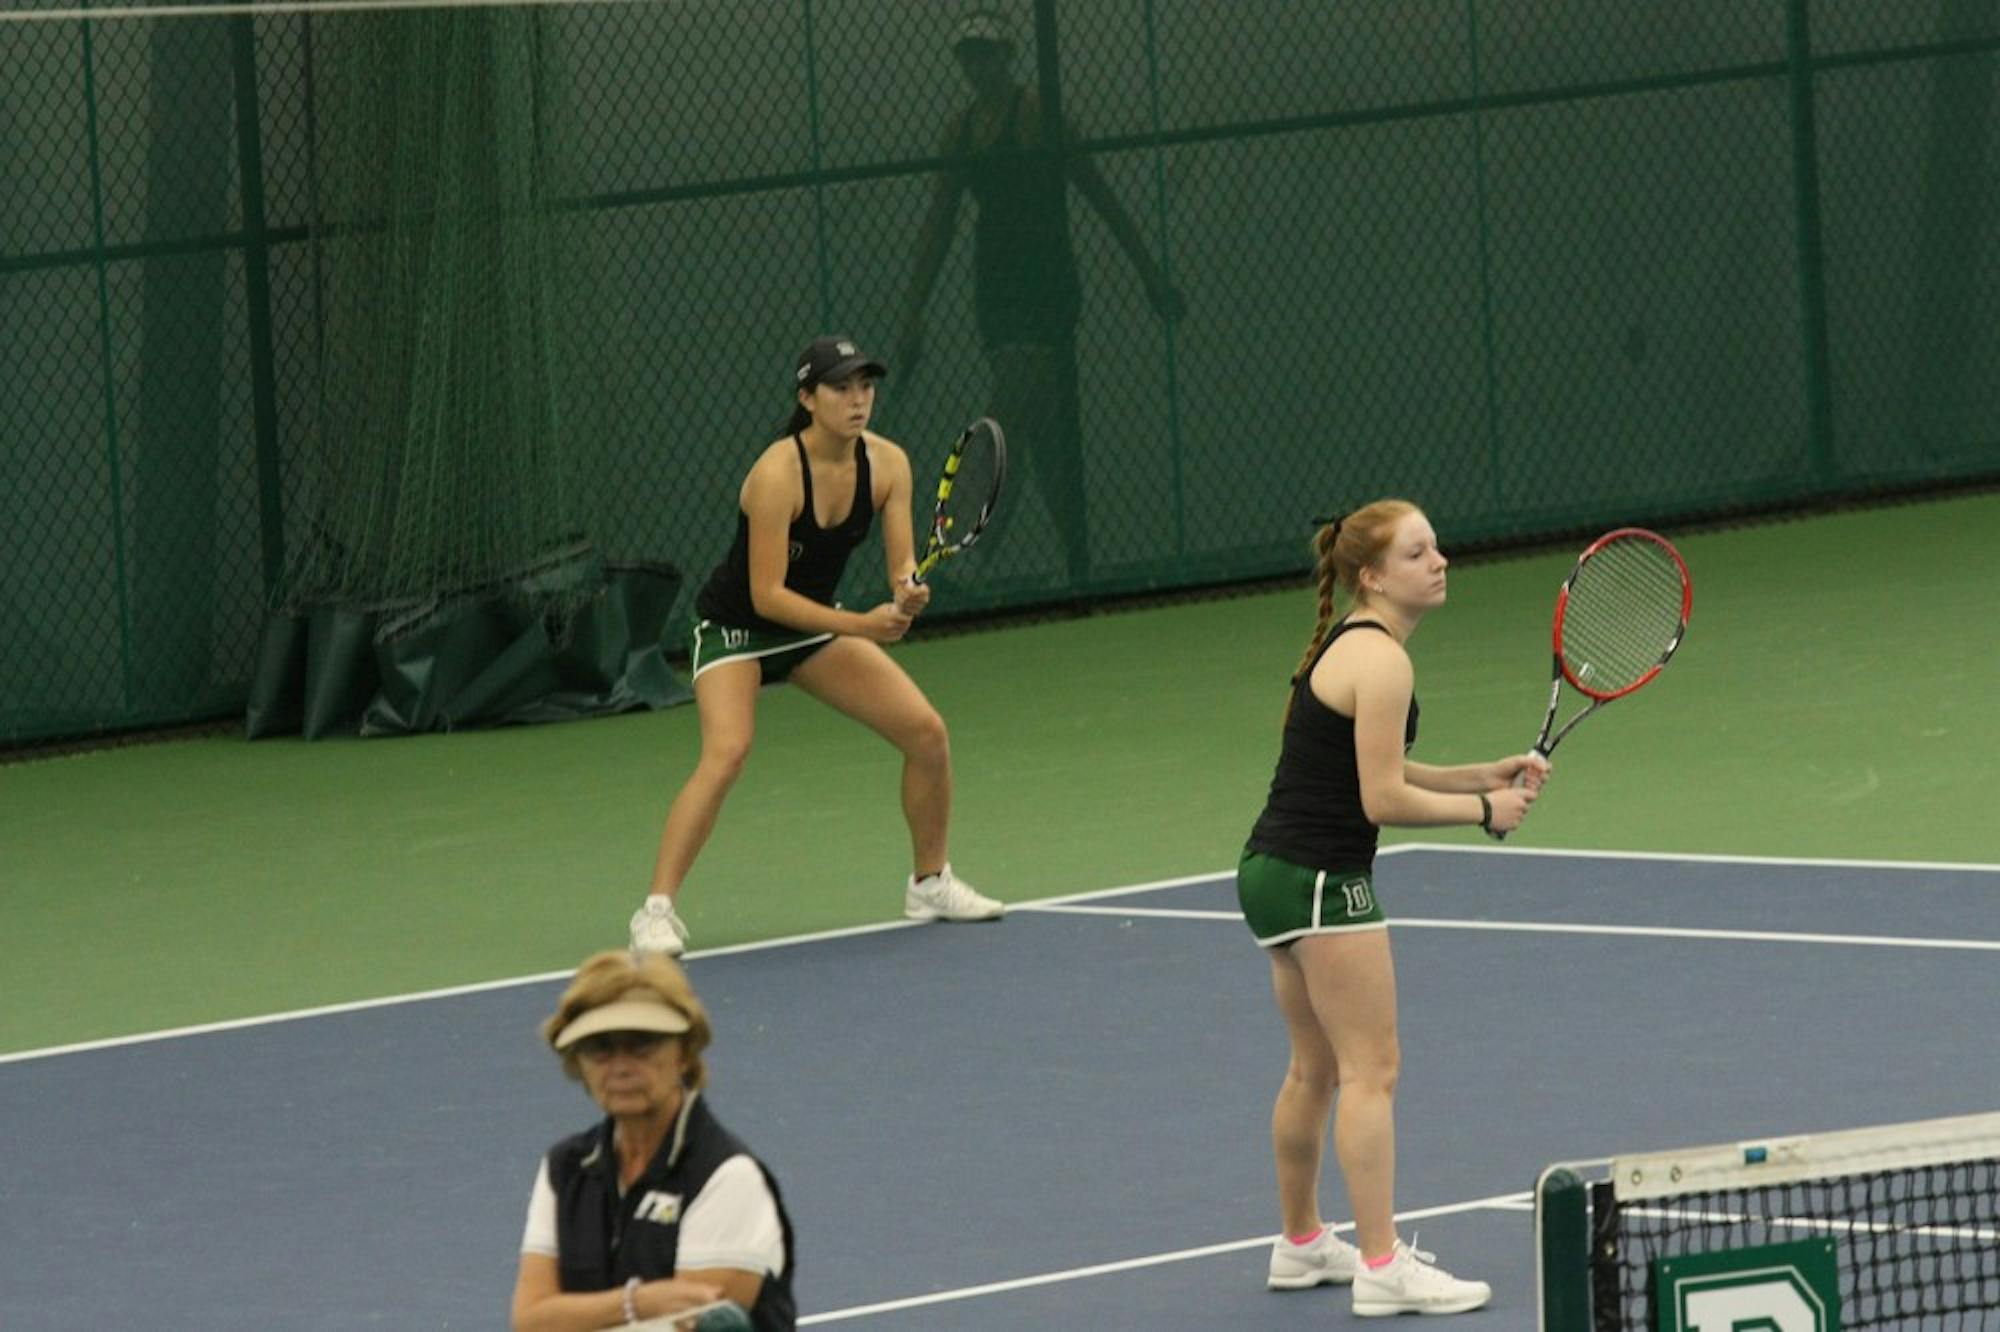 The women's tennis team has consistently&nbsp;boasted strong retention rates over the past three years.&nbsp;